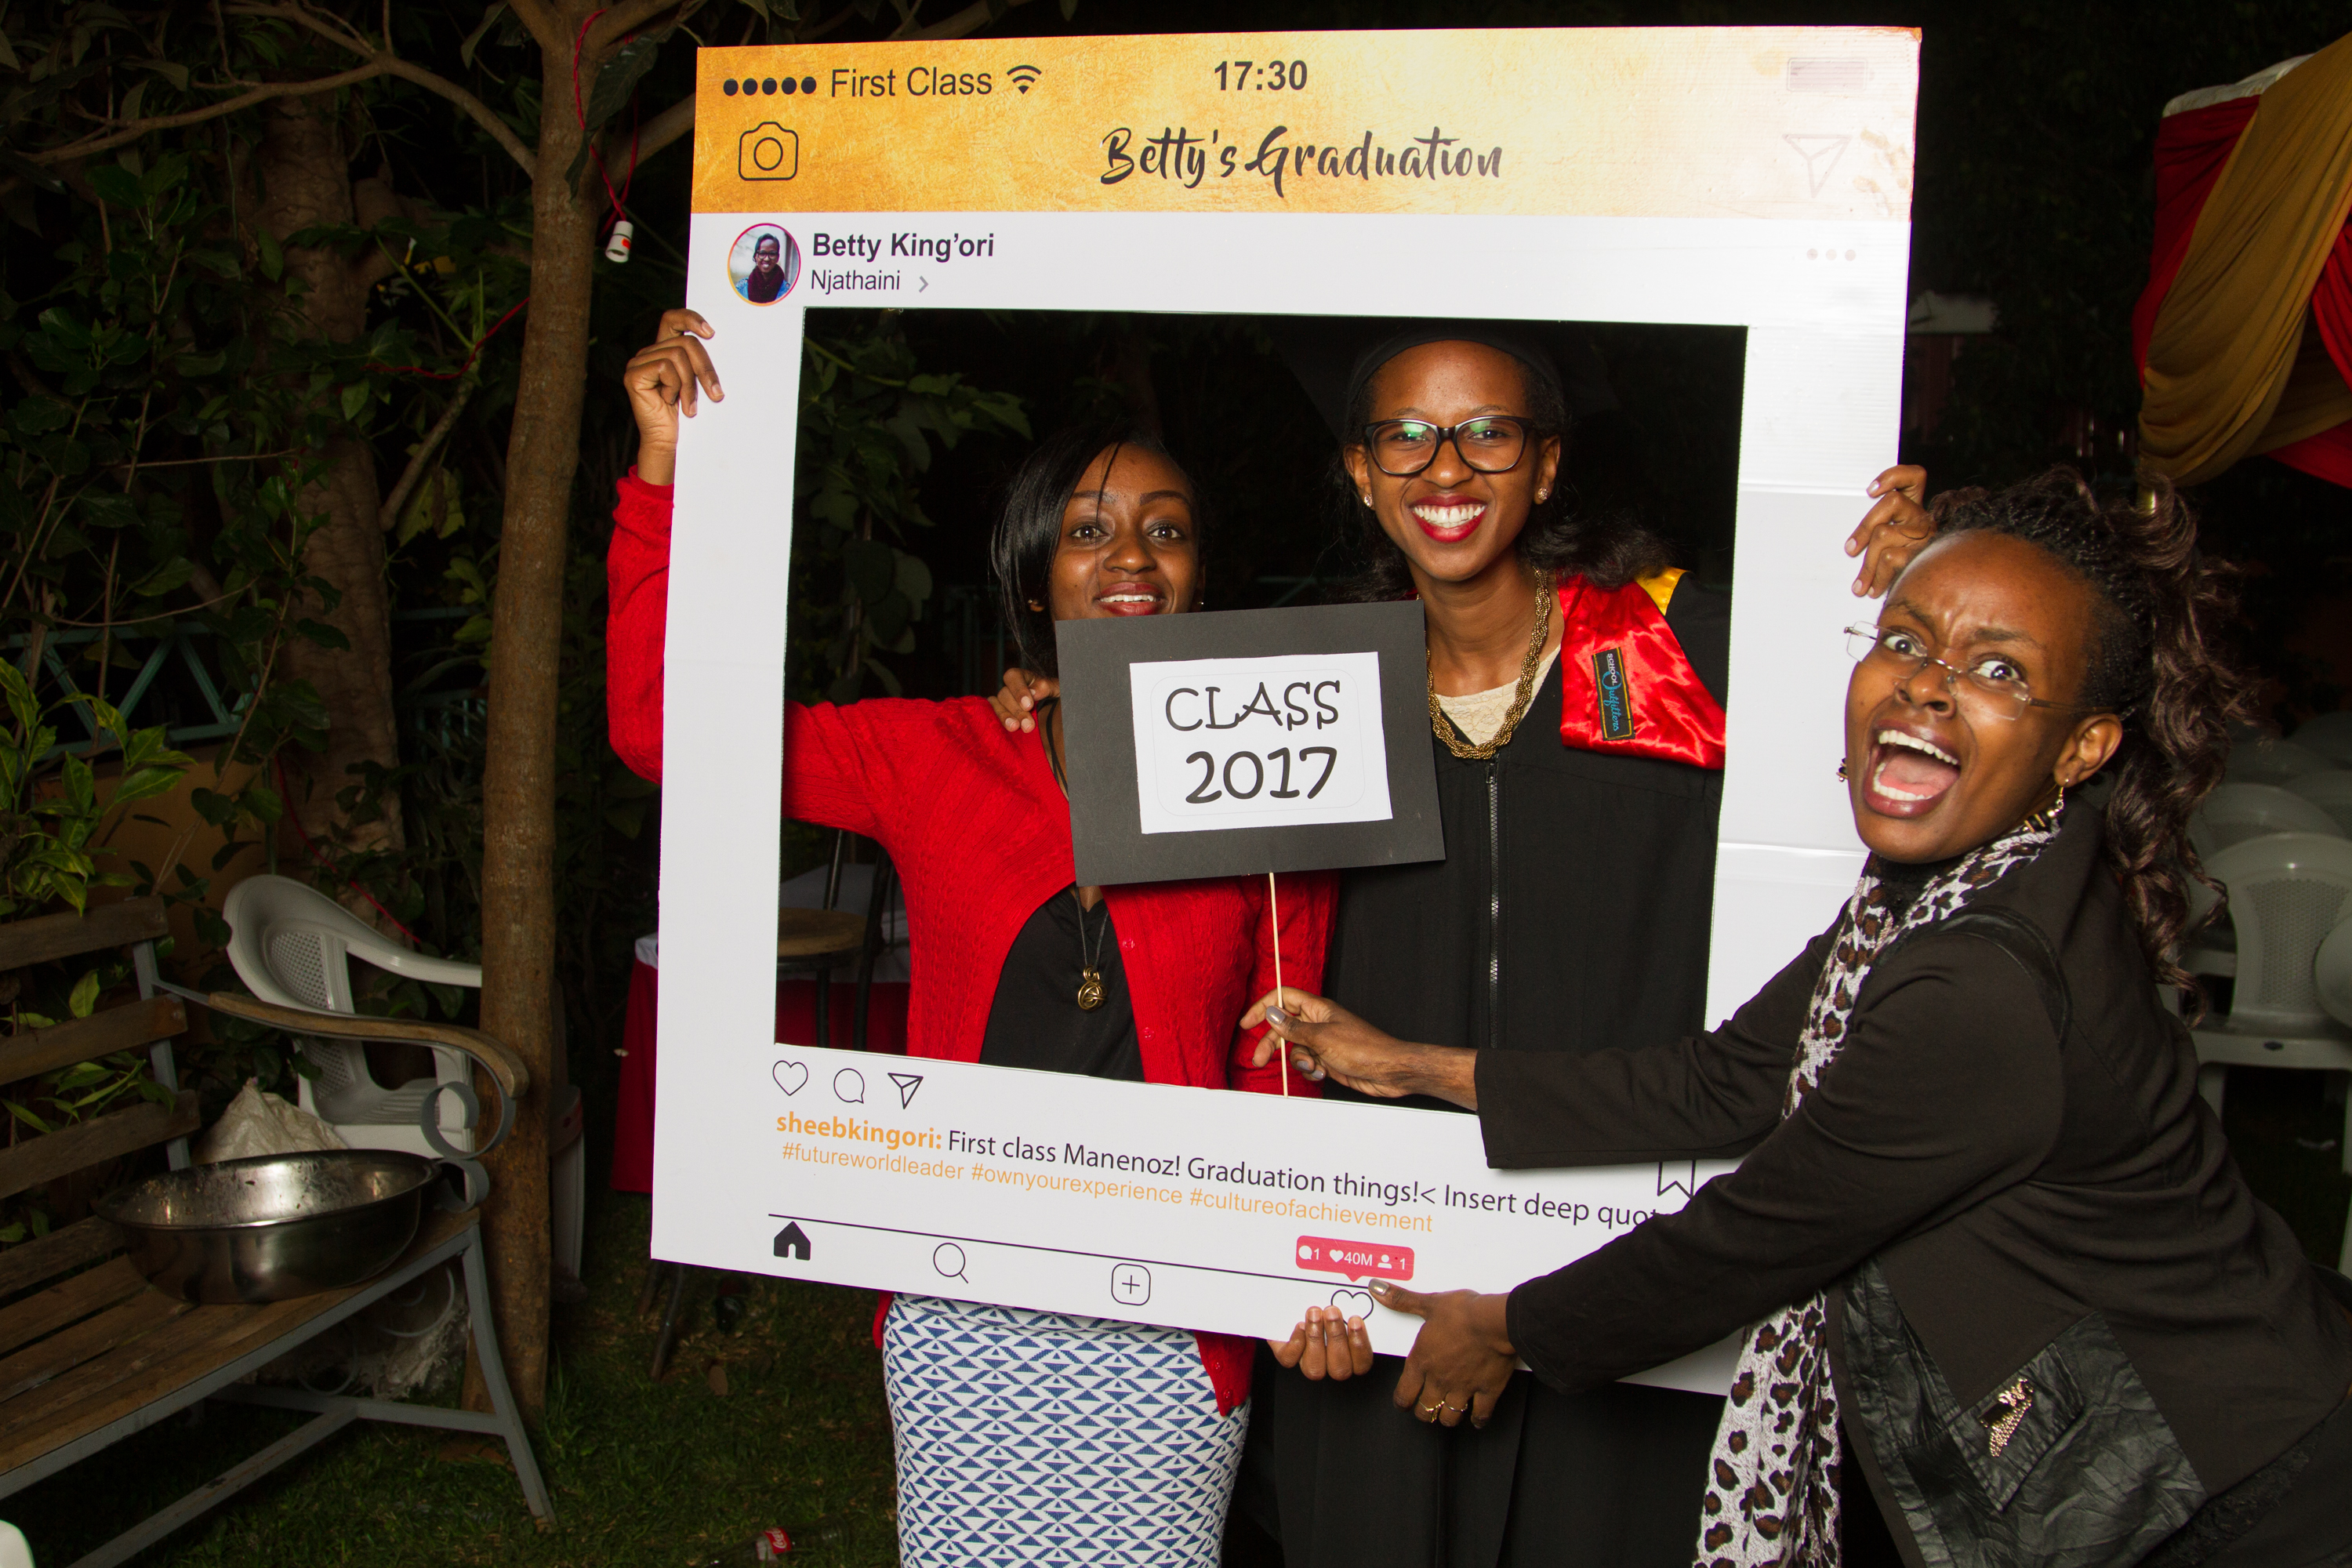 In this photo, Ms. Betty King'ori (centre) is seen with two adoring fans at her graduation party *insert emoji*